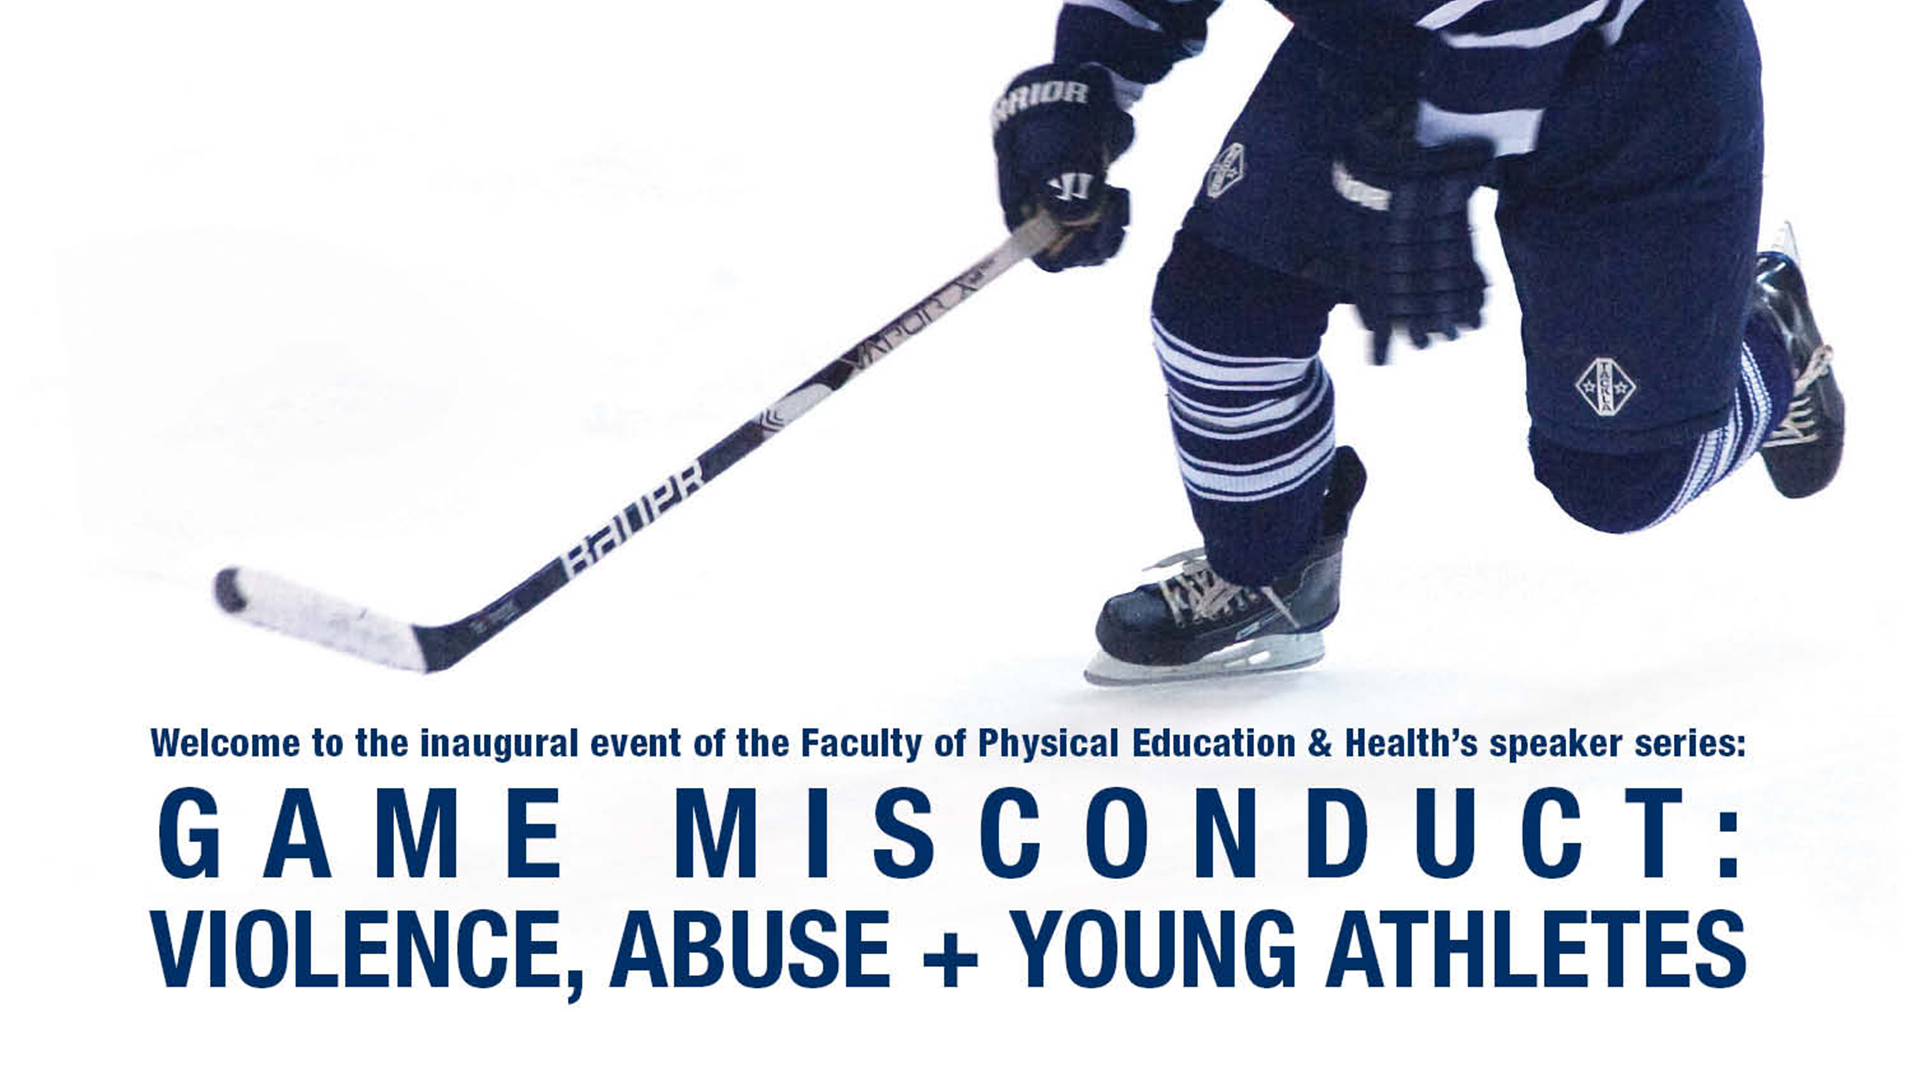 Varsity Blues Hockey athlete on a Game Misconduct event composite